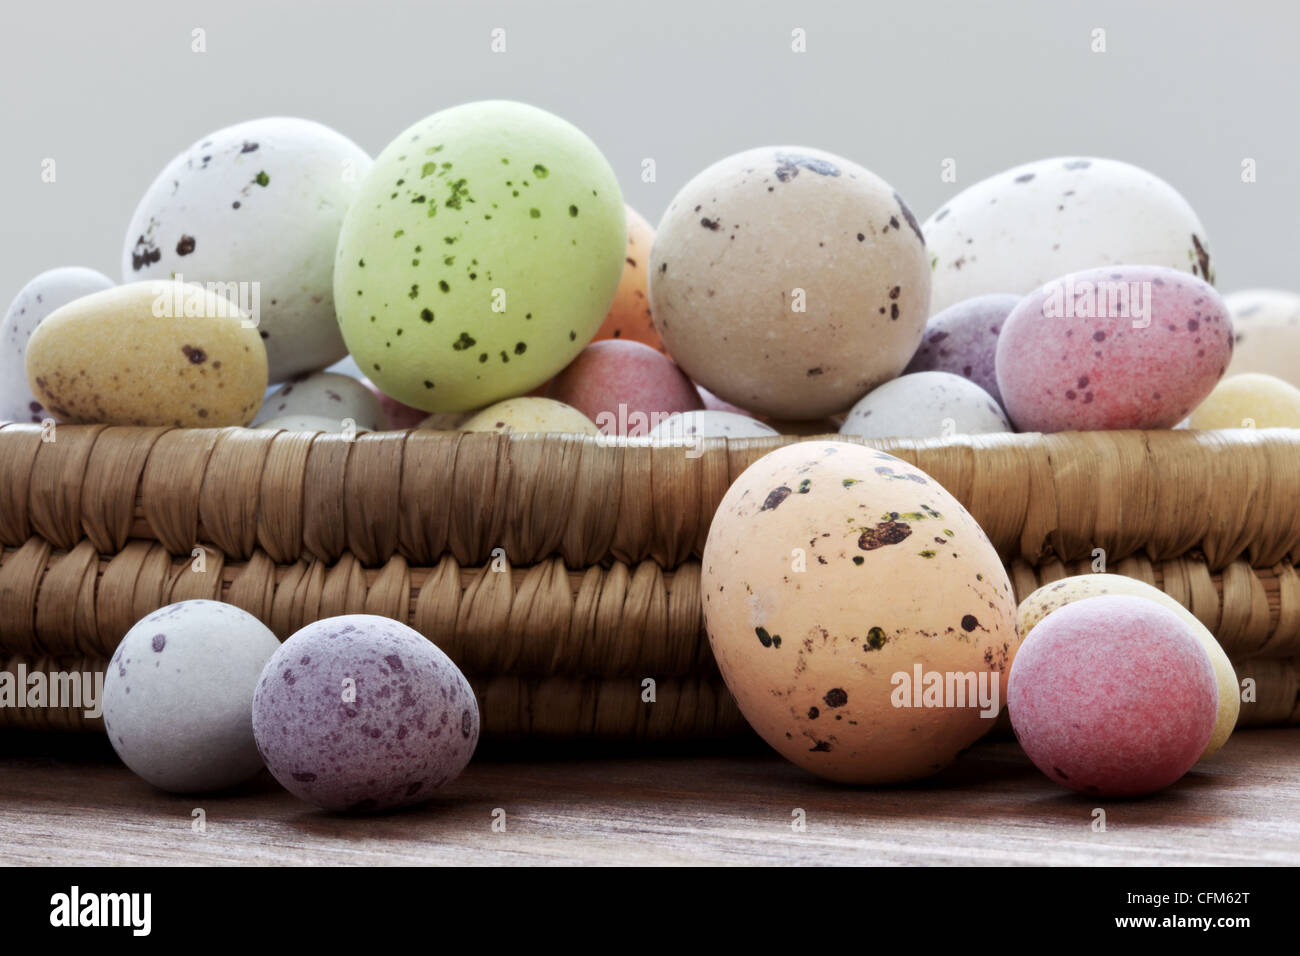 Still life photo of speckled candy covered chocolate easter eggs in a wicker basket on a rustic wooden table. Stock Photo